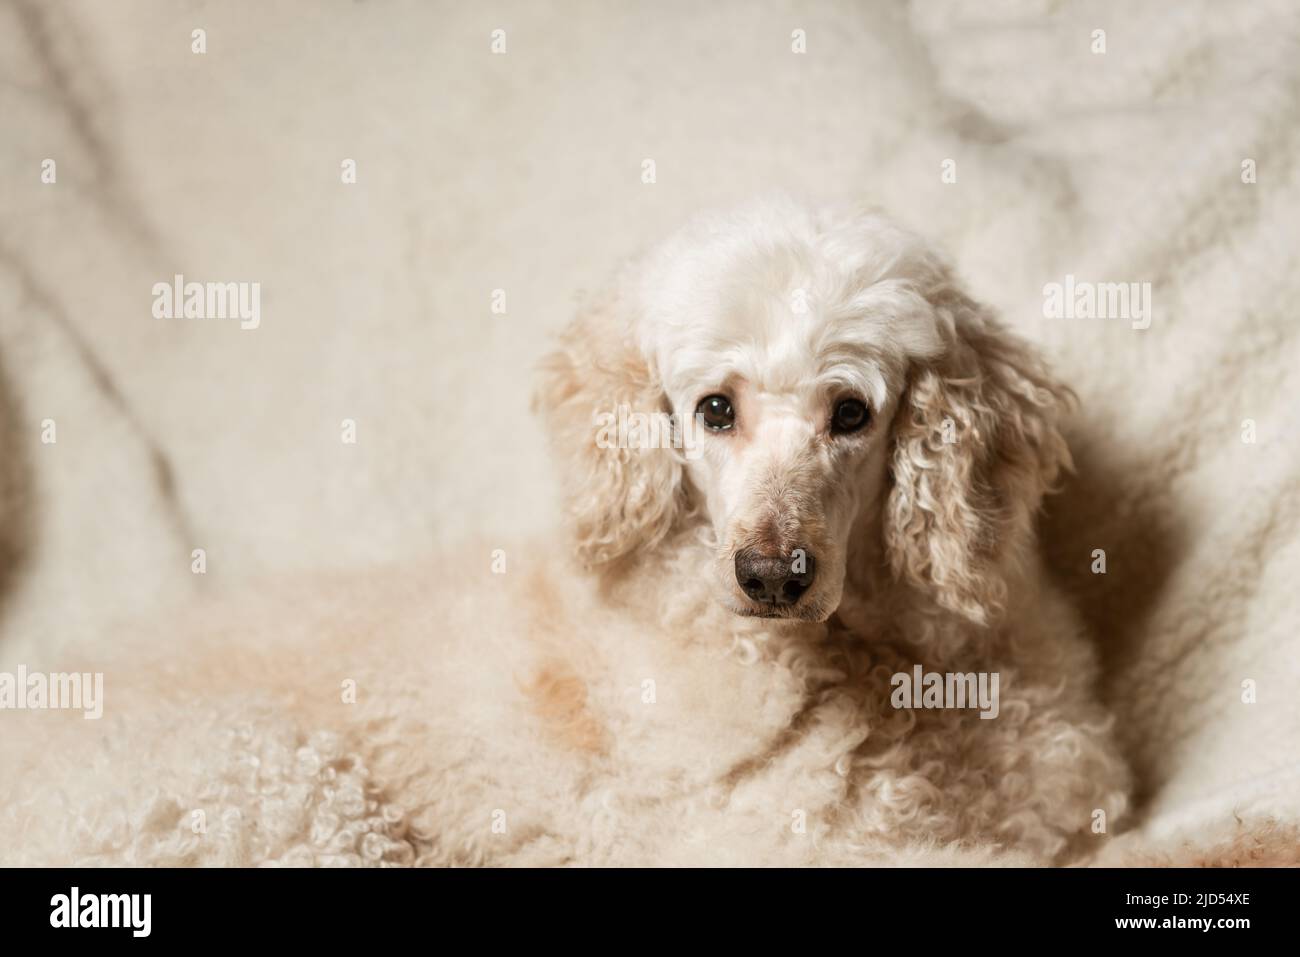 A large dog, a royal poodle, is proudly lying on the couch Stock Photo